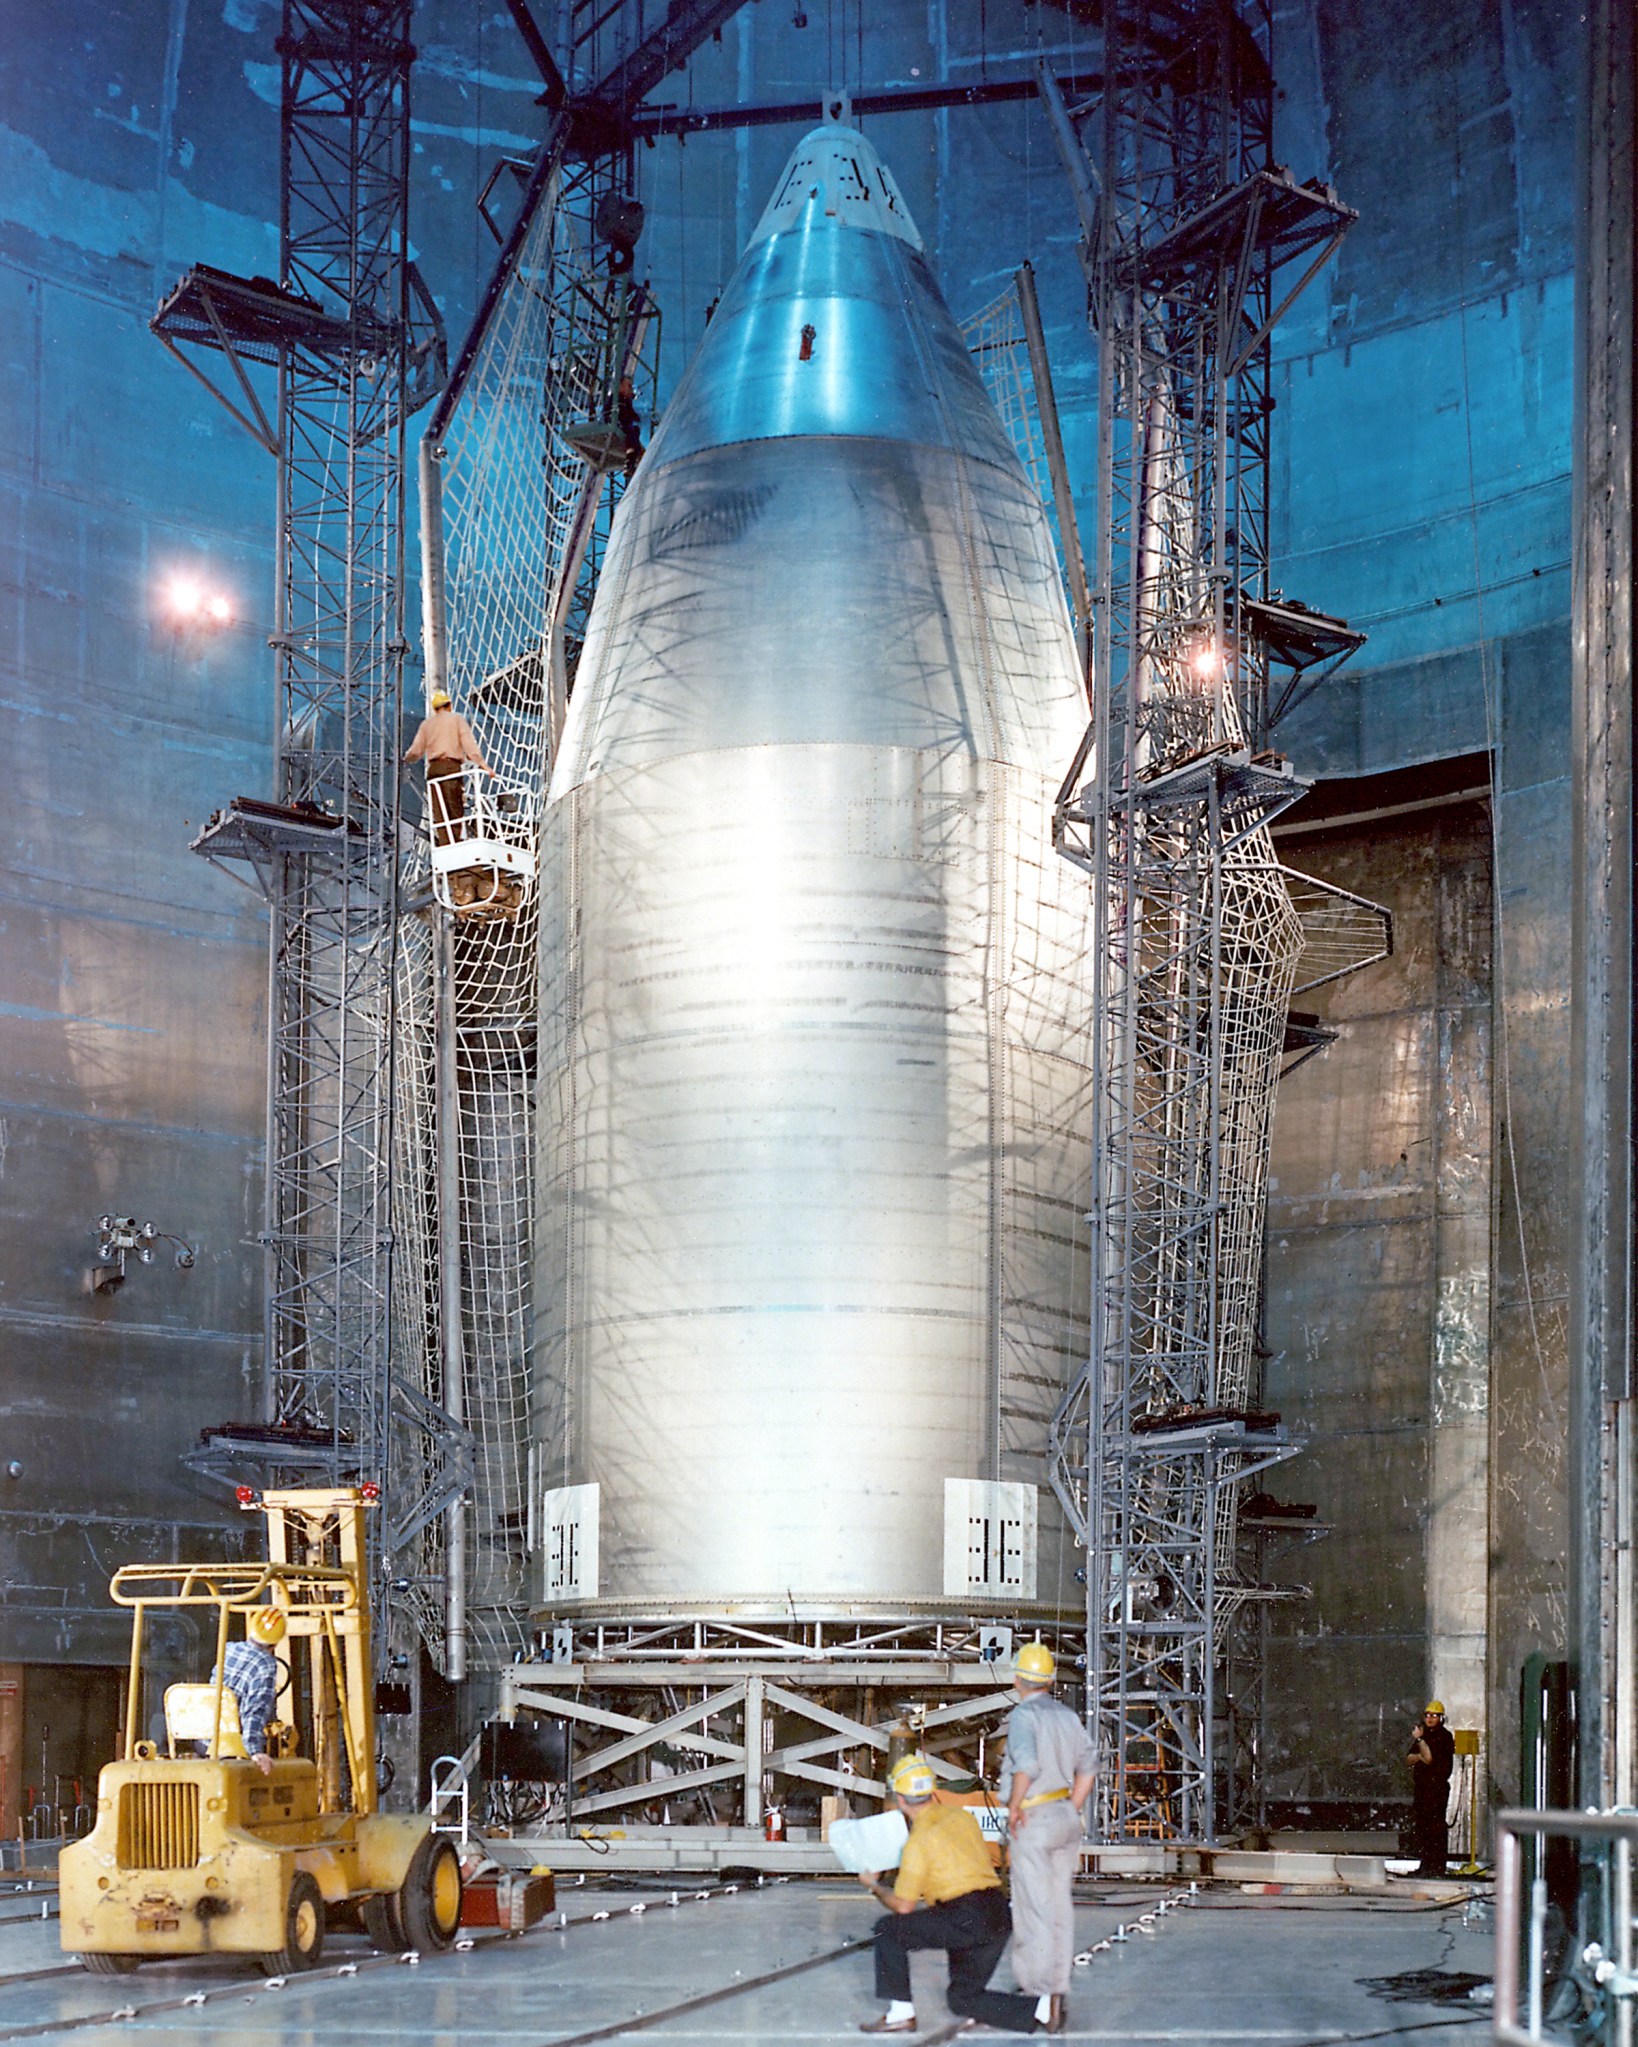 Metallic protective cover for Skylab at Glenn Research Center